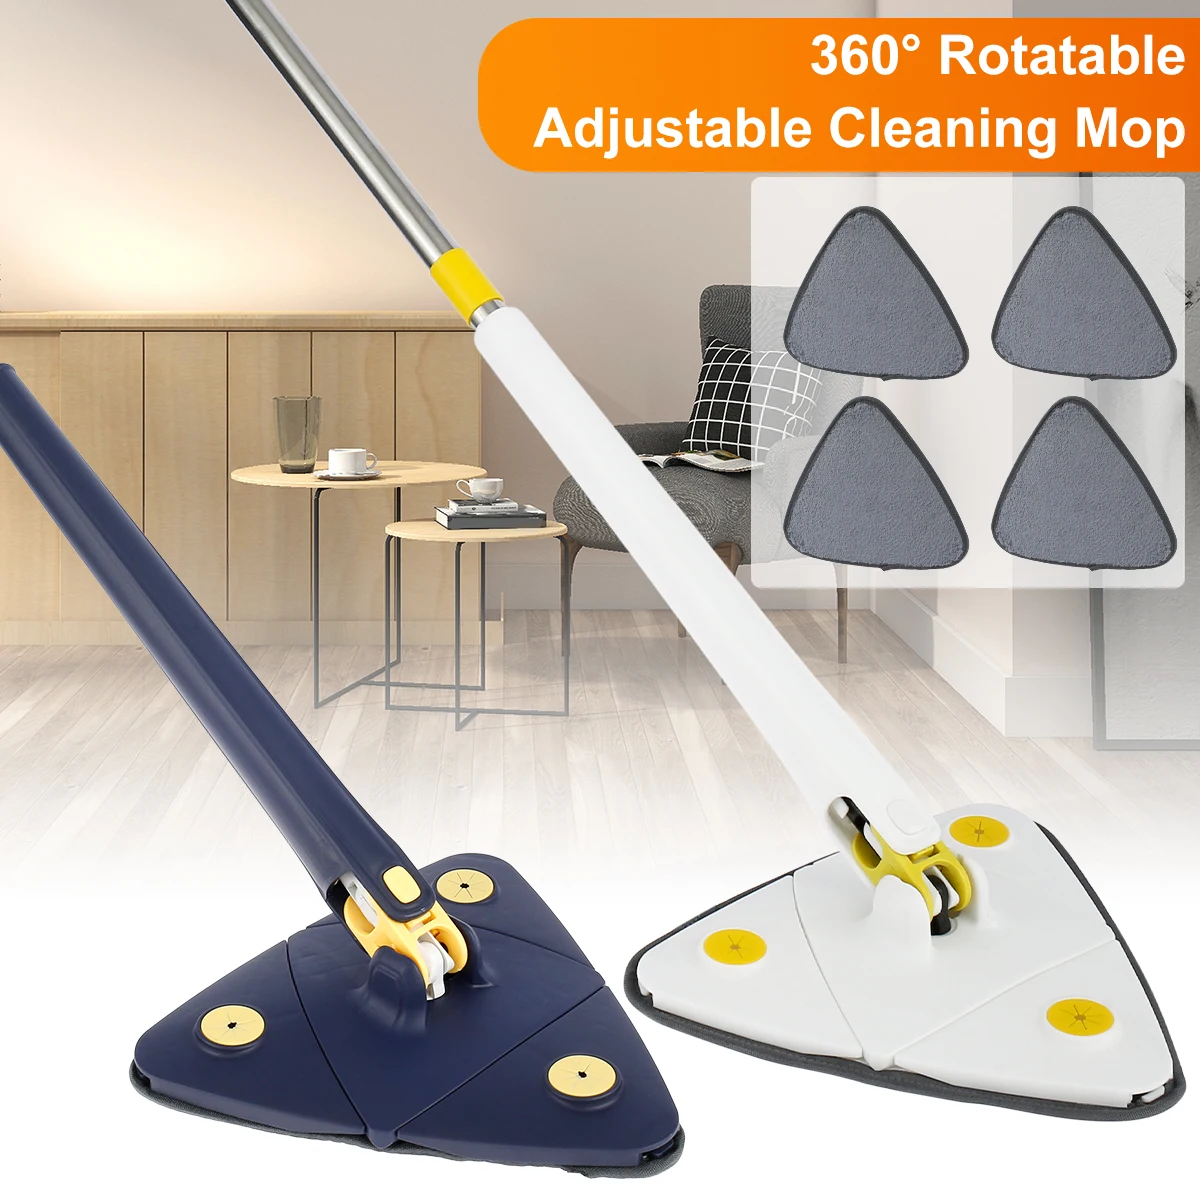 Telescopic Triangle Mop 360° Rotatable Spin Cleaning Mop Adjustable Squeeze Wet and Dry Use Water Absorption Home Floor Tools 1